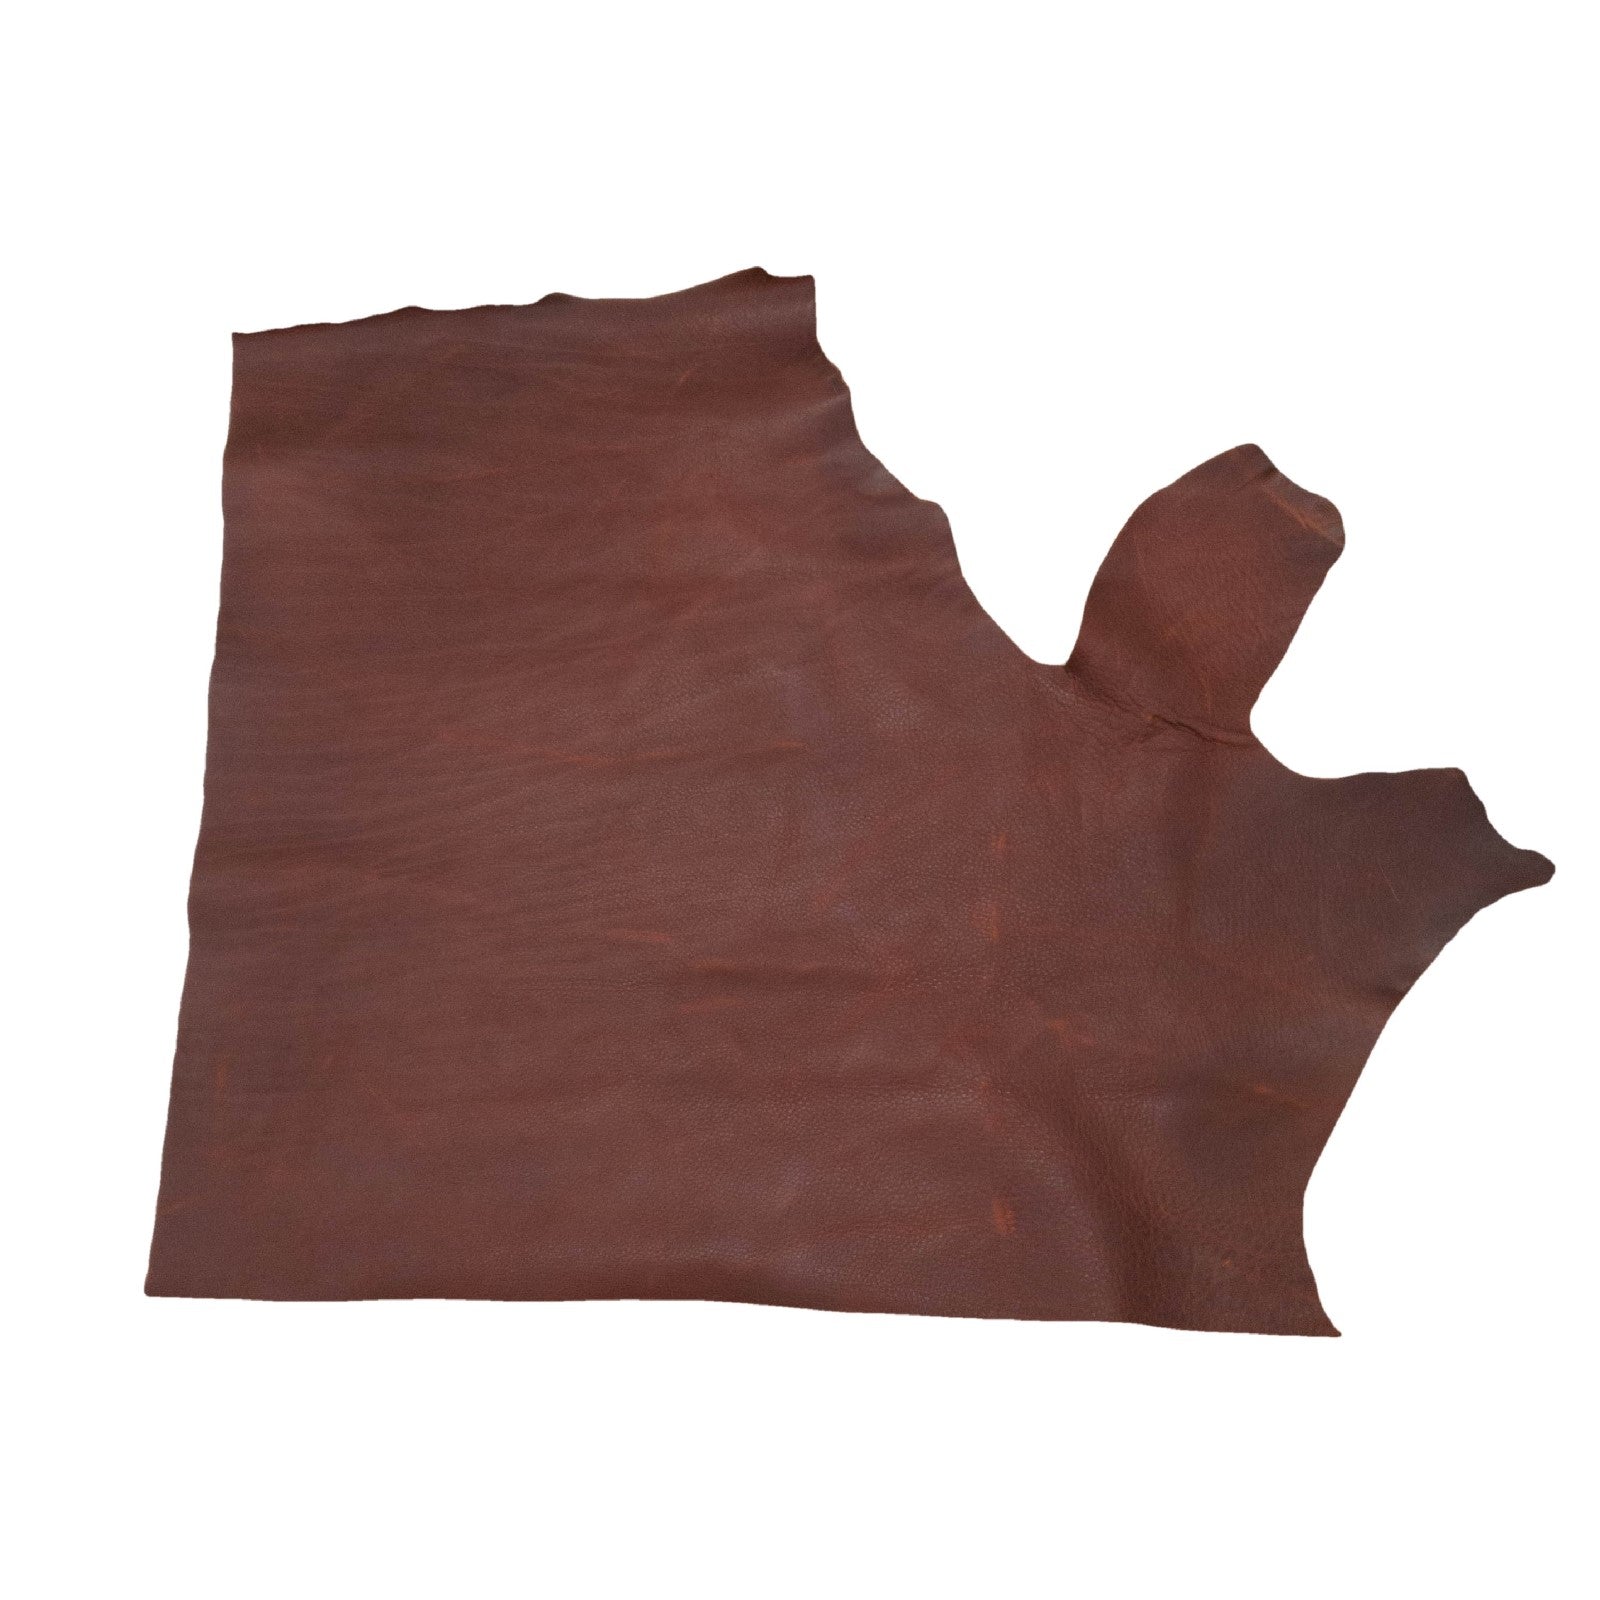 Mountain Man Maroon, Chap Cow Sides, Highland Ridge, 6.5-7.5 / Project Piece (Top) | The Leather Guy